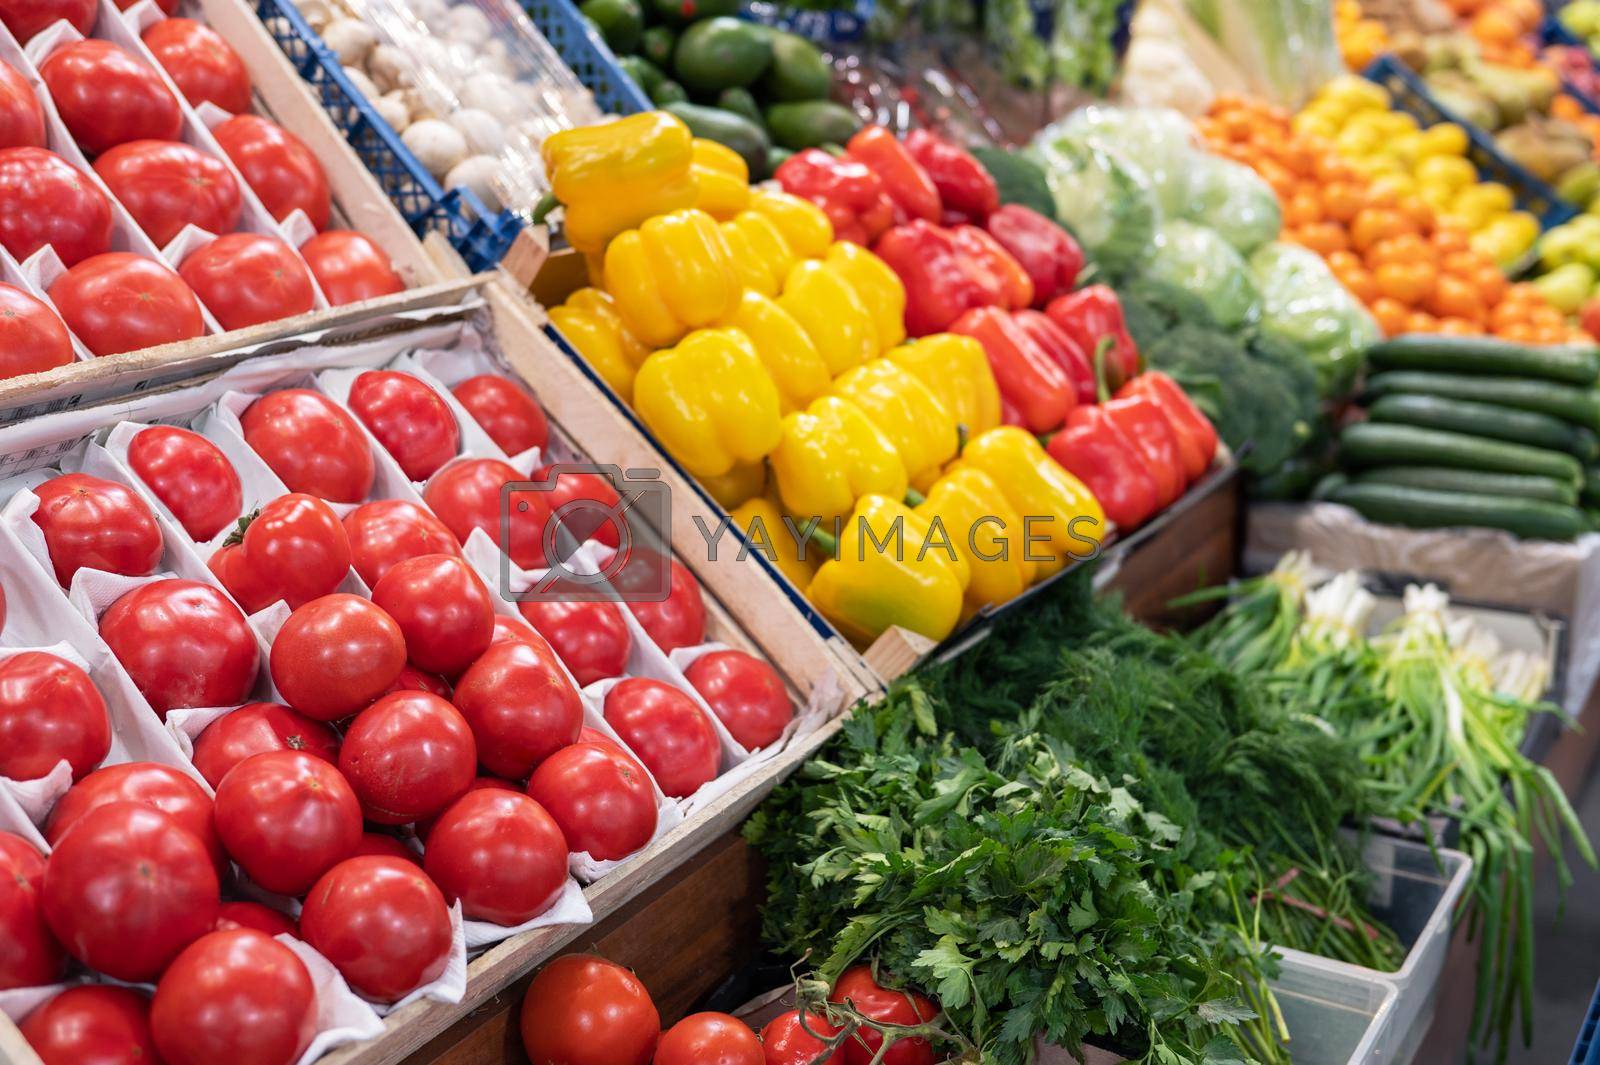 Royalty free image of Assortment of fresh vegetables by rusak